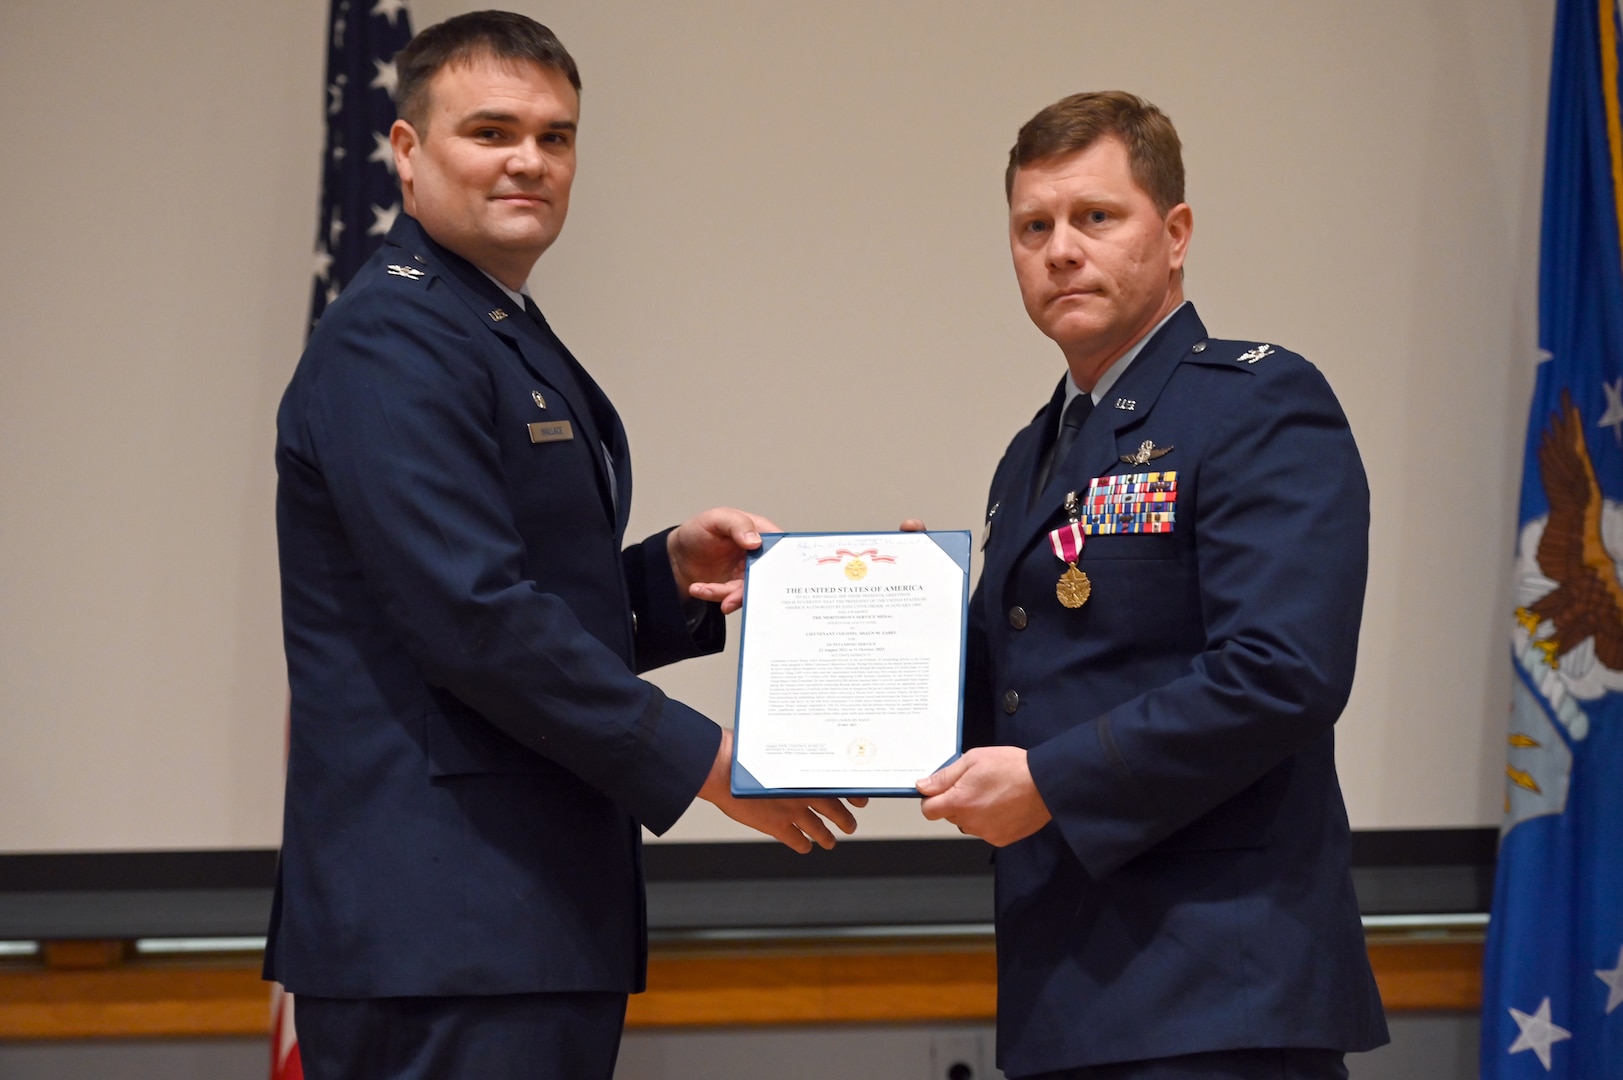 Col. Richard Wallace, 960th Cyberspace Operations Group commander, and Col. Shaun Zabel present the awarded certificate for the Meritorious Service Medal for Zabel’s outstanding service as 960th Cyberspace Operations Group deputy commander at Joint Base San Antonio-Kelly Annex, Texas on Jan. 6, 2024. (U.S. Air Force photo by 2d Lt Alex Dieguez)